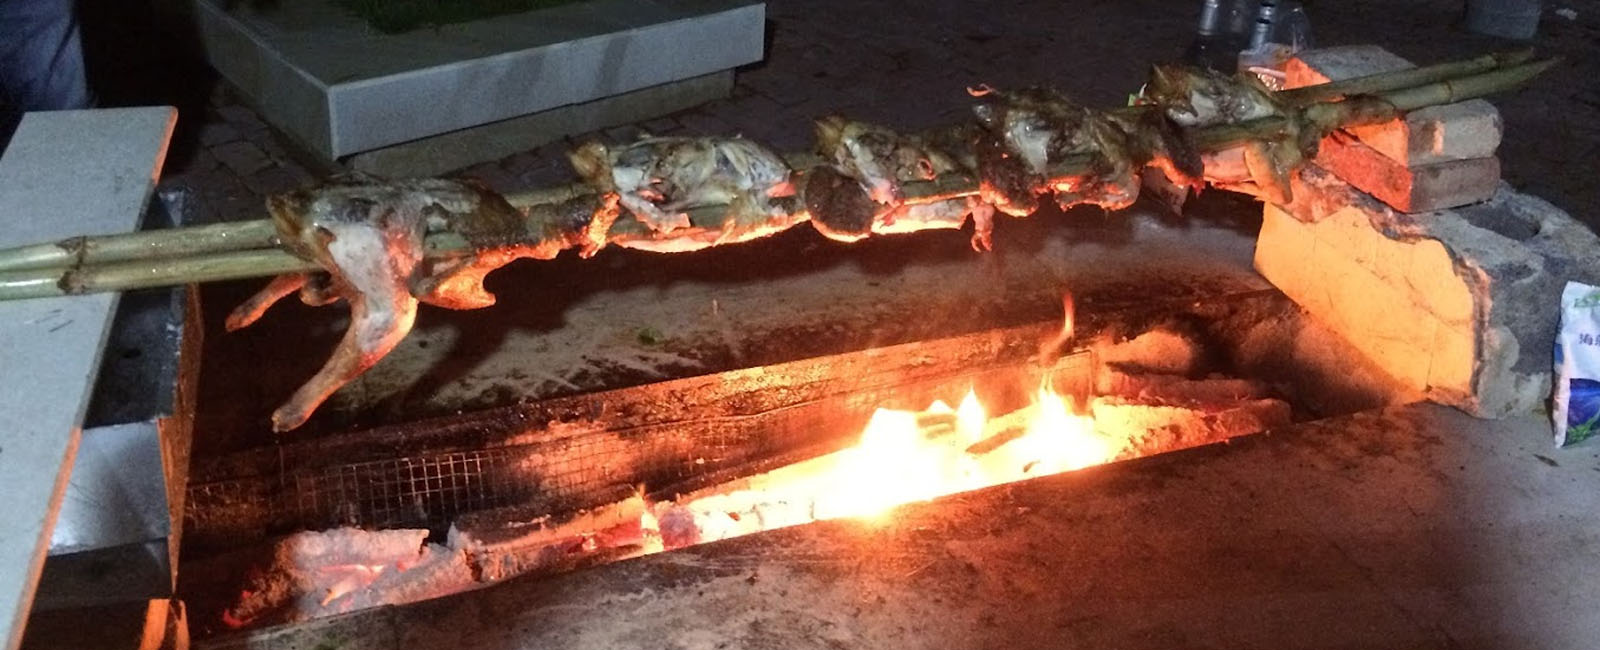 Chickens on a spit roasting over flaming charcoals 